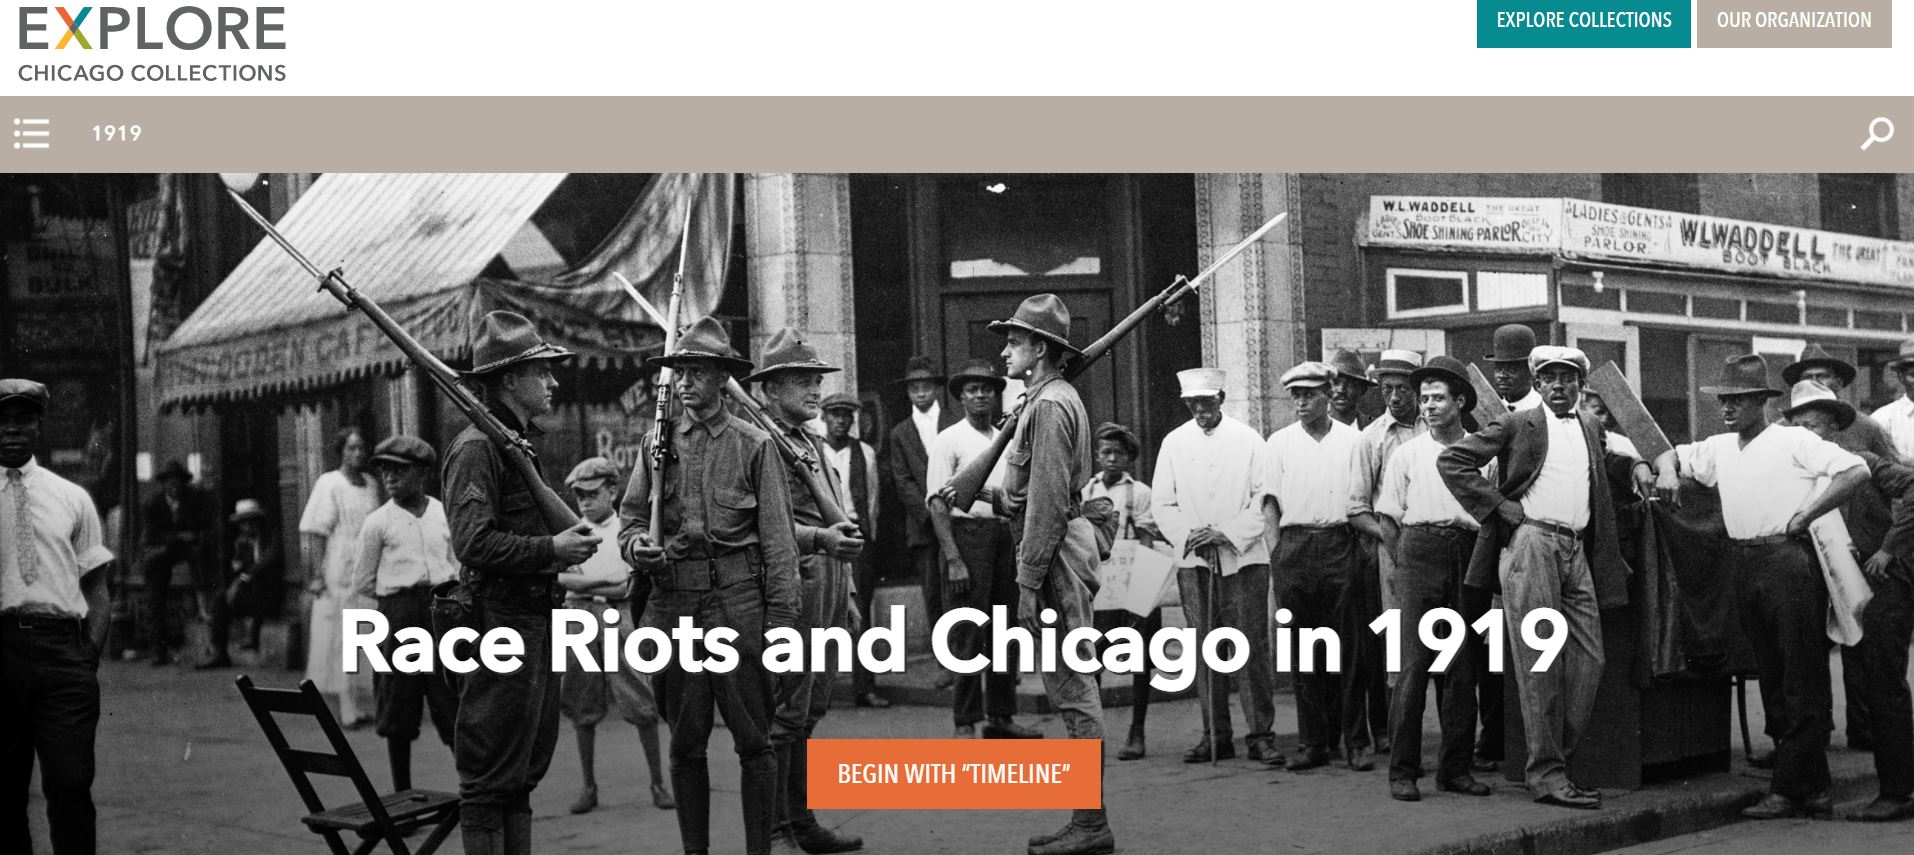 "Race Riots and Chiacgo in 1919," an example of a digital Black history project